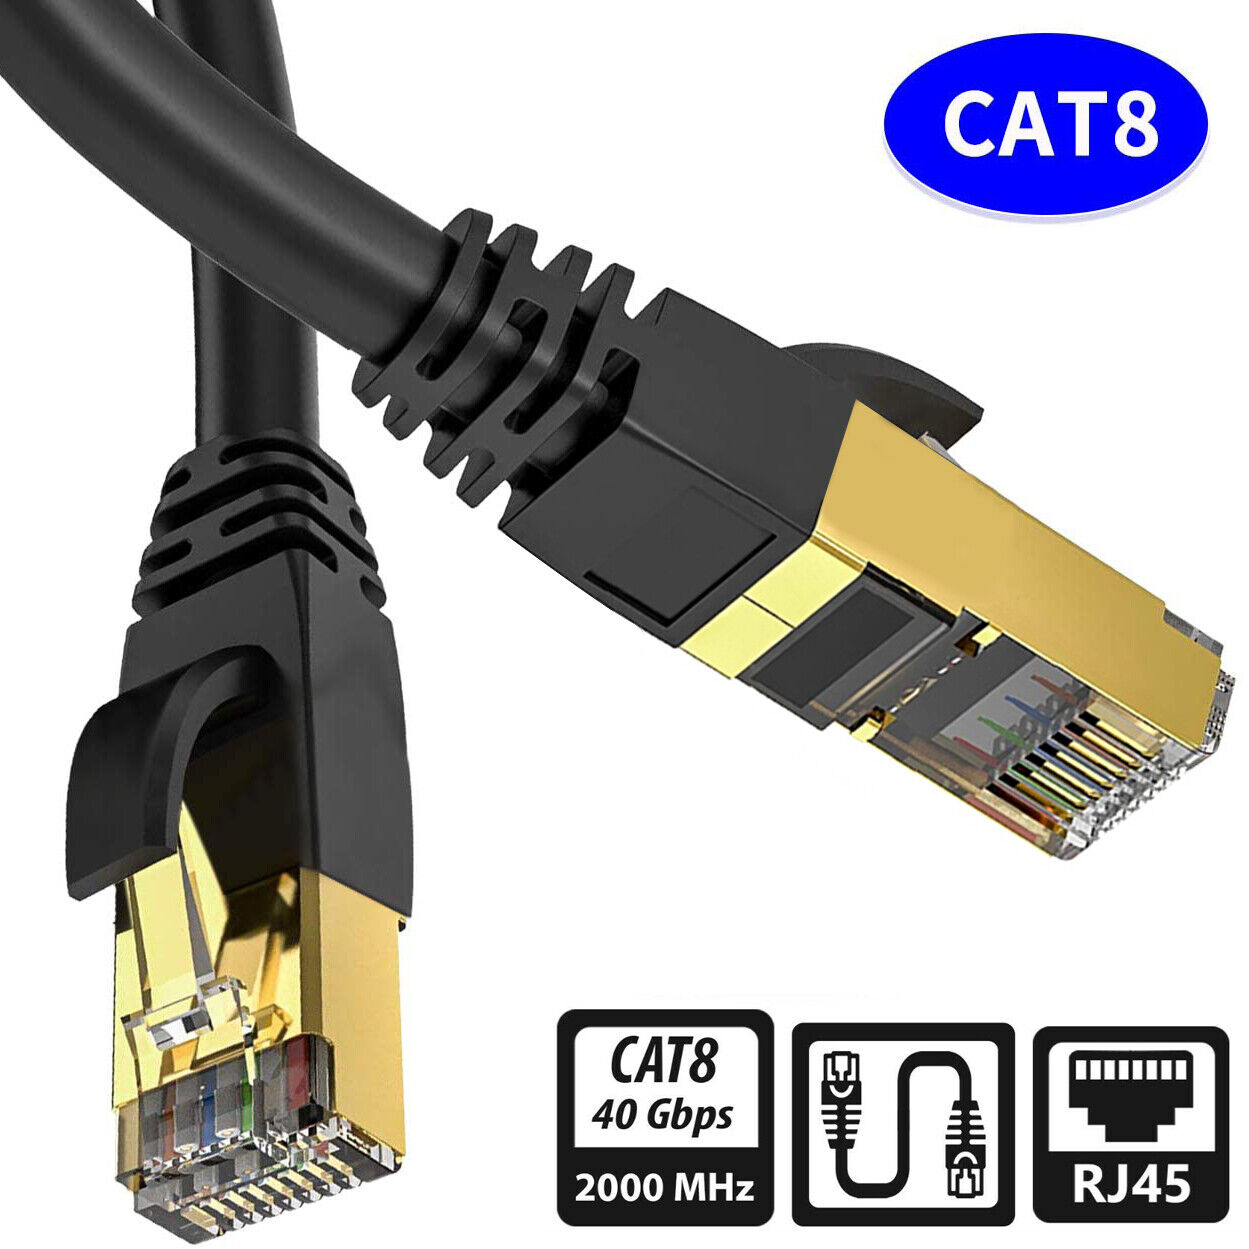 Professional LAN Cord Shielded Cat 8 Ethernet Cable 6ft 10ft 15ft 30ft 50ft Lot